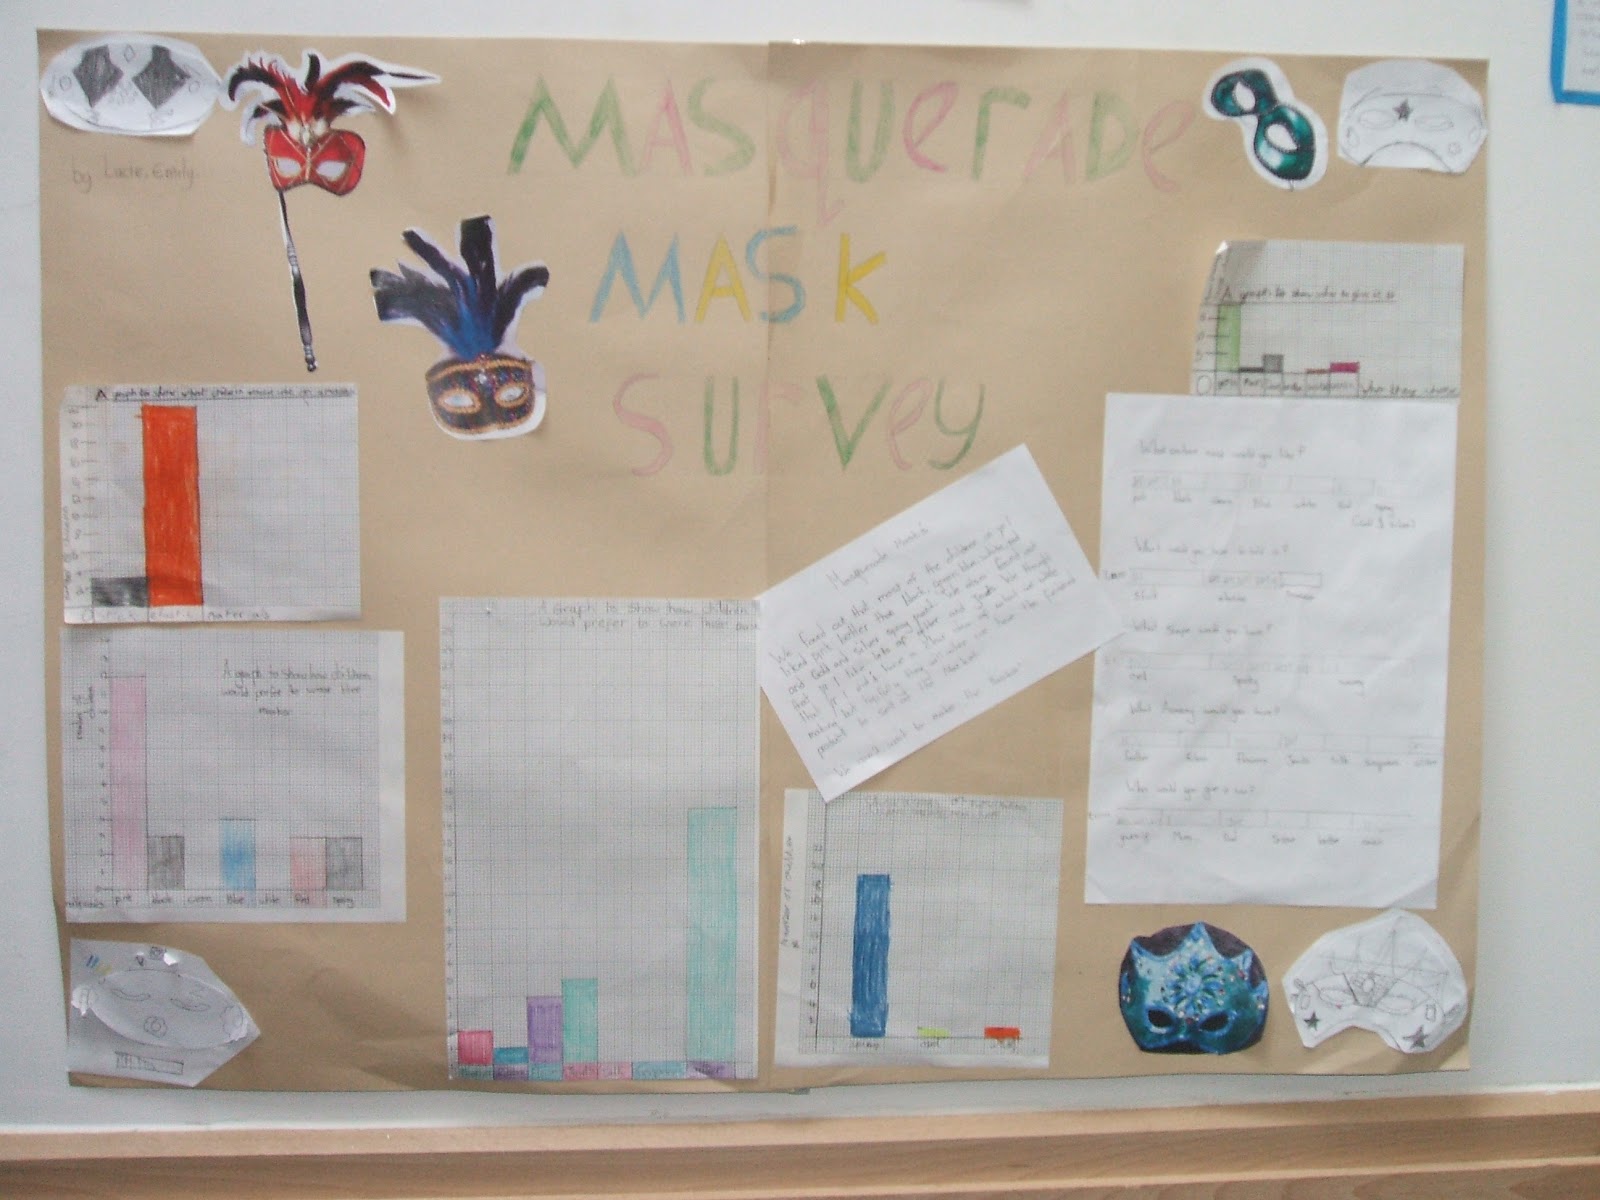 Primary Maths Wall Displays